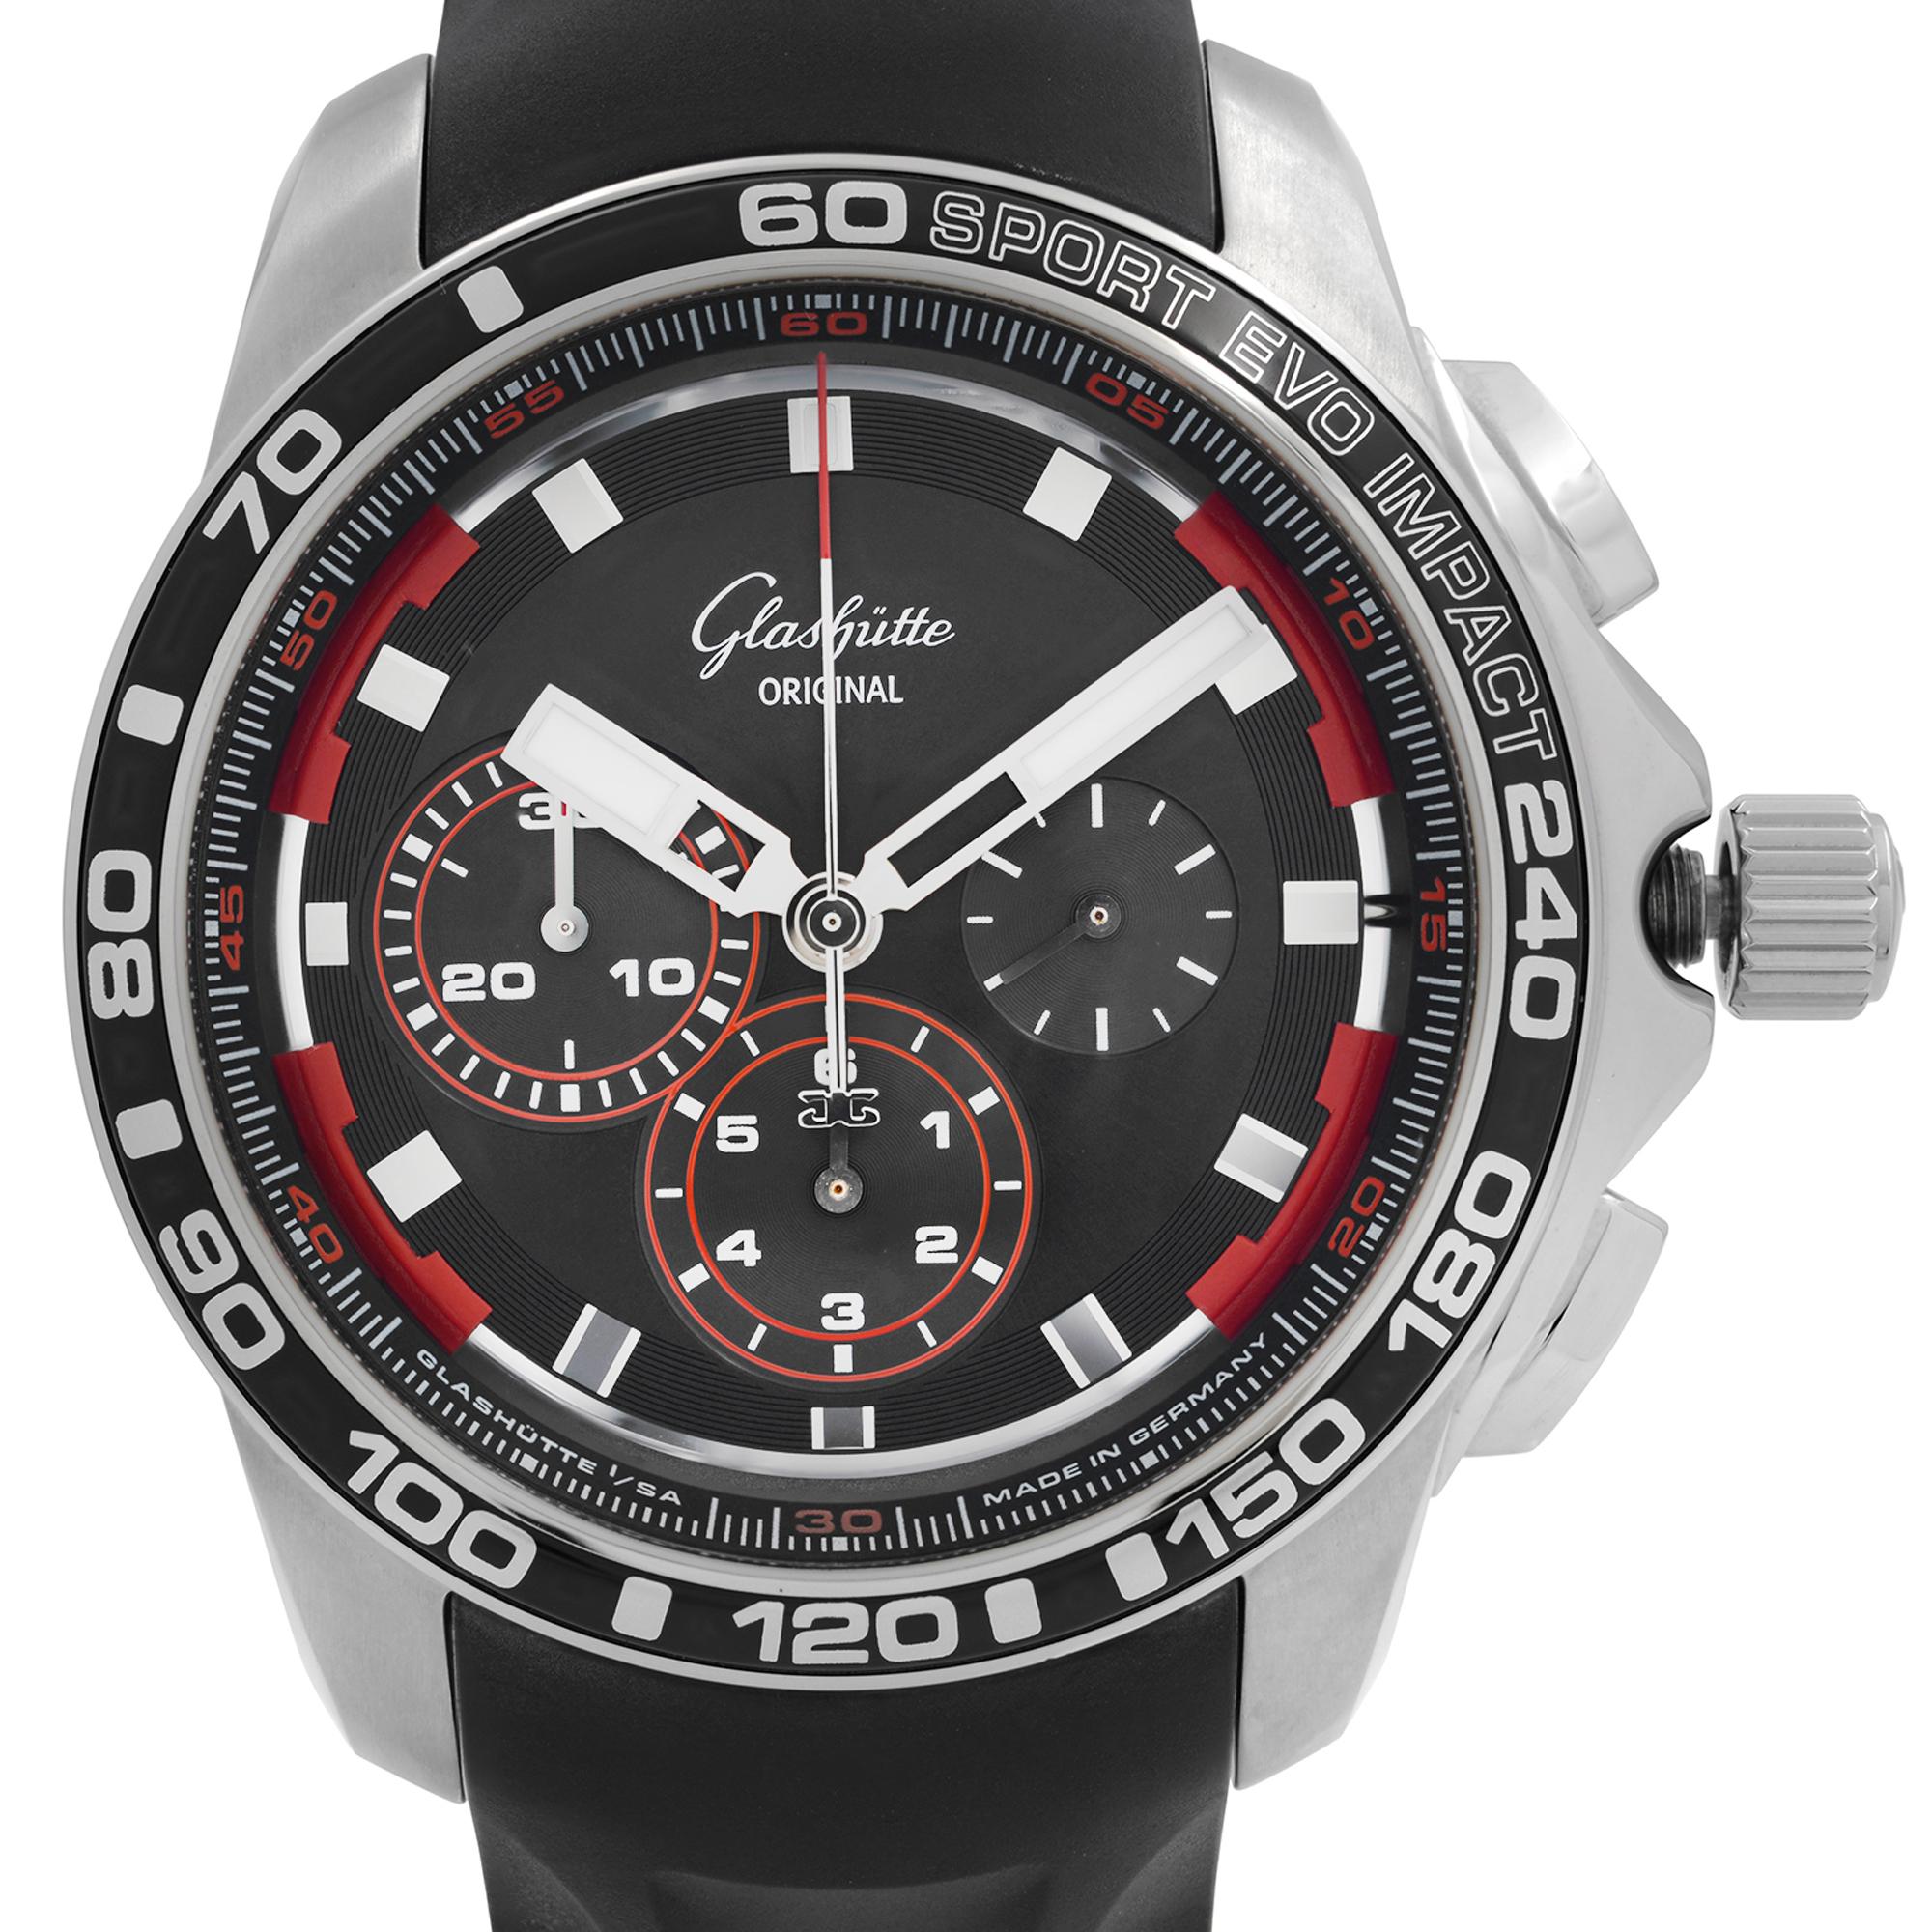 Display Model Glashutte Original Sport Evolution Black Dial Automatic Mens Watch 39-31-73-73-04 This Beautiful Timepiece is Powered by Mechanical (Automatic) Movement And Features: Round Stainless Steel Case with a Black Rubber Buckle Strap Fixed